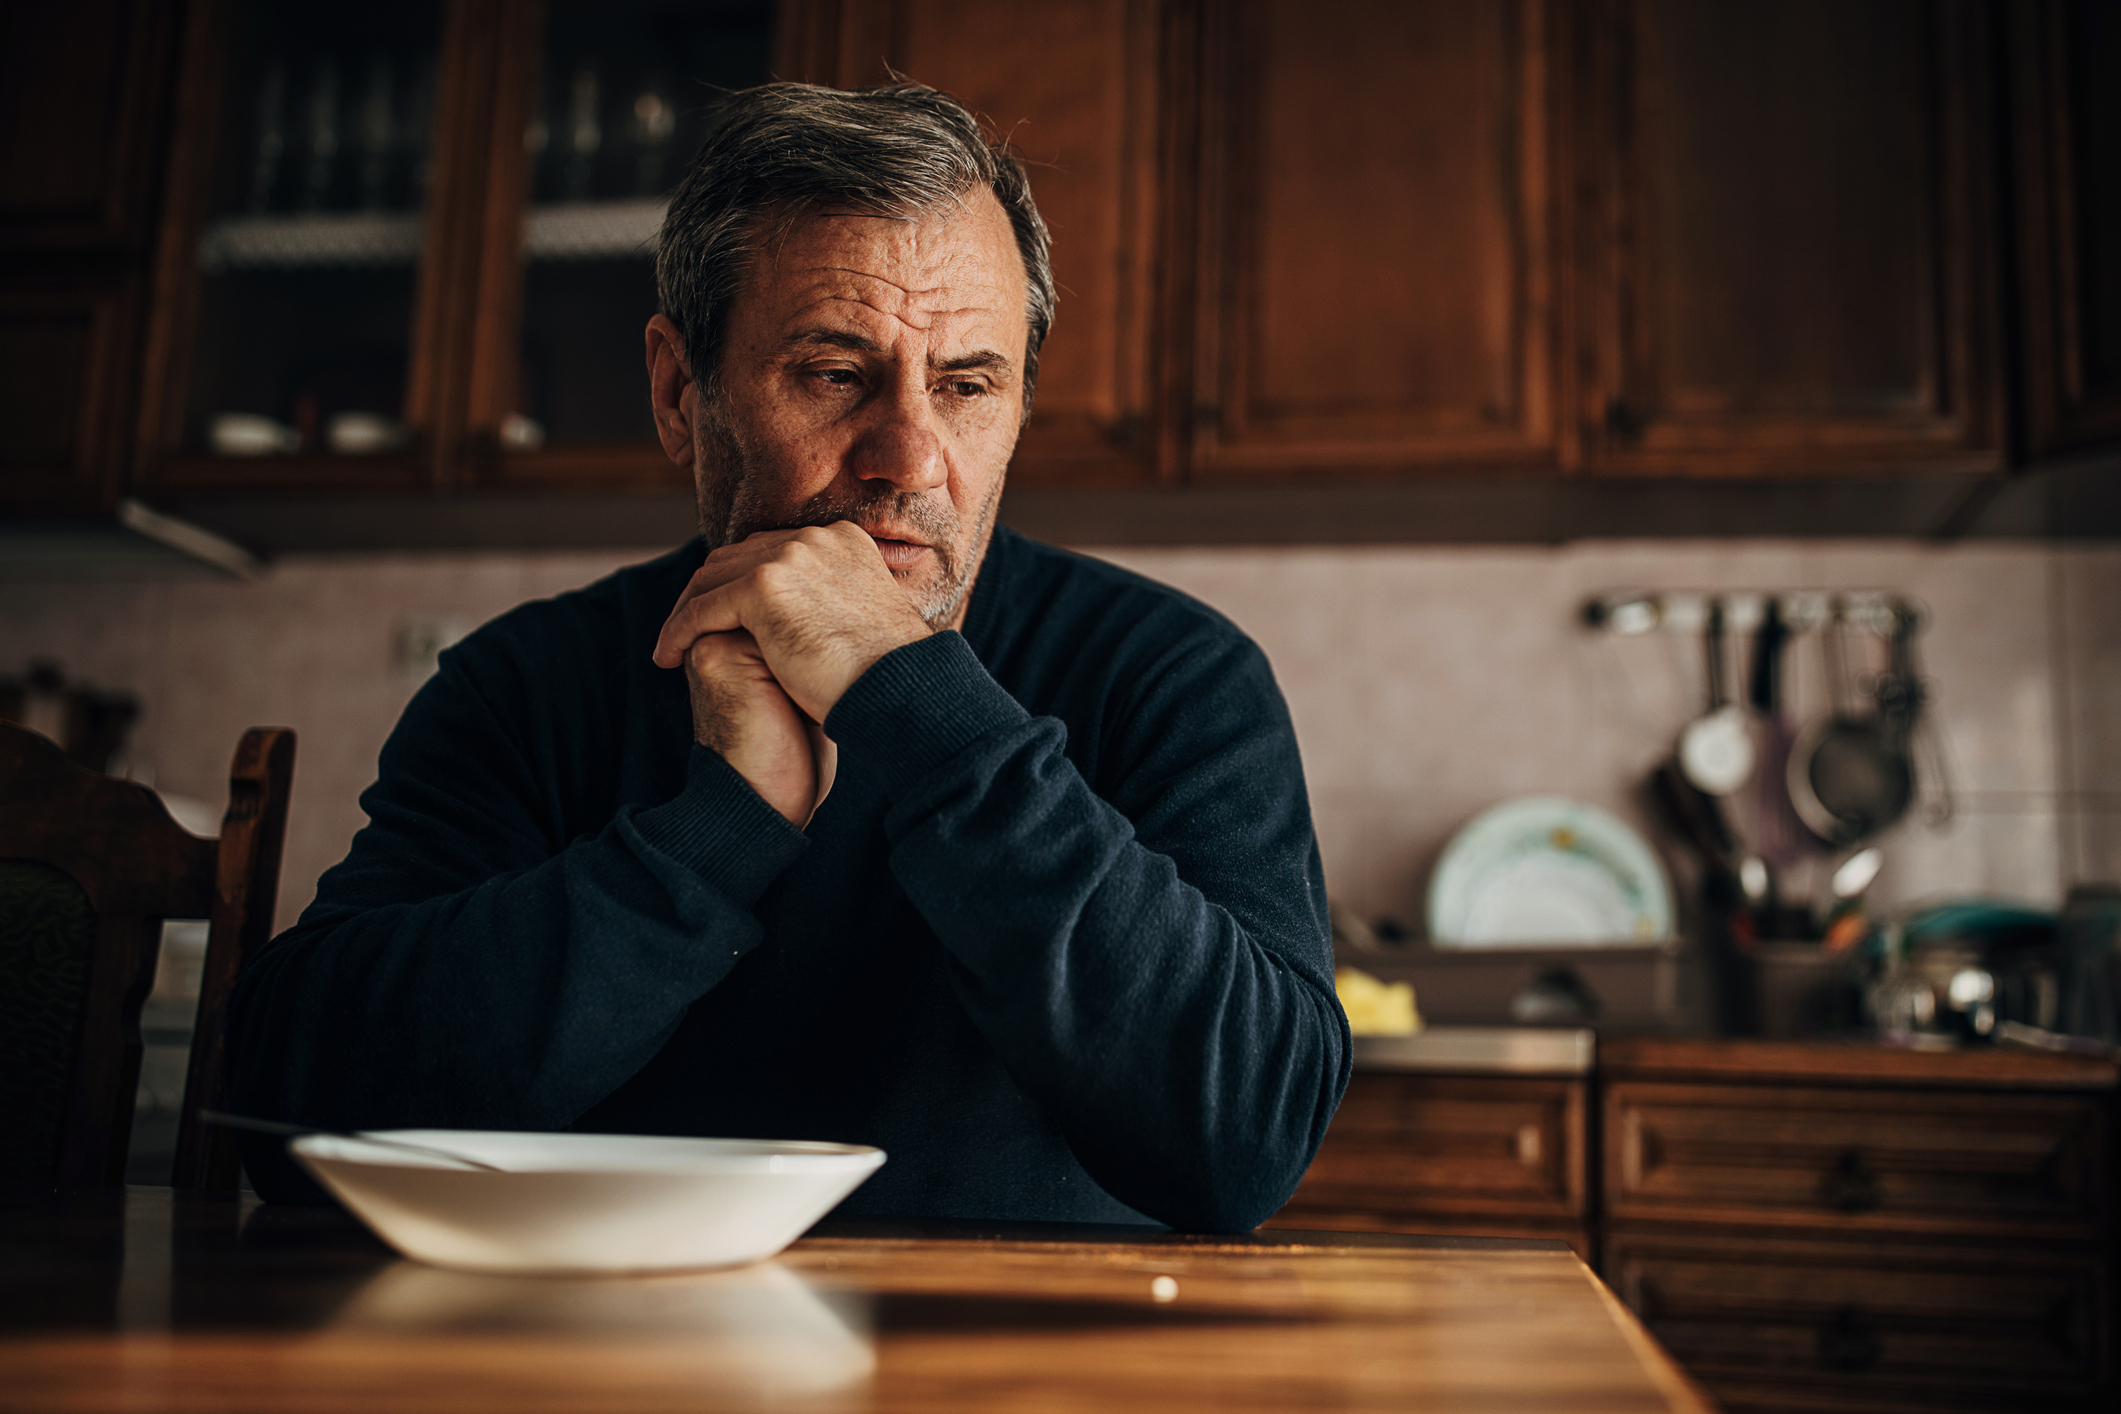 Man sitting at a table with a contemplative expression, resting his chin on his hands, with an empty bowl in front